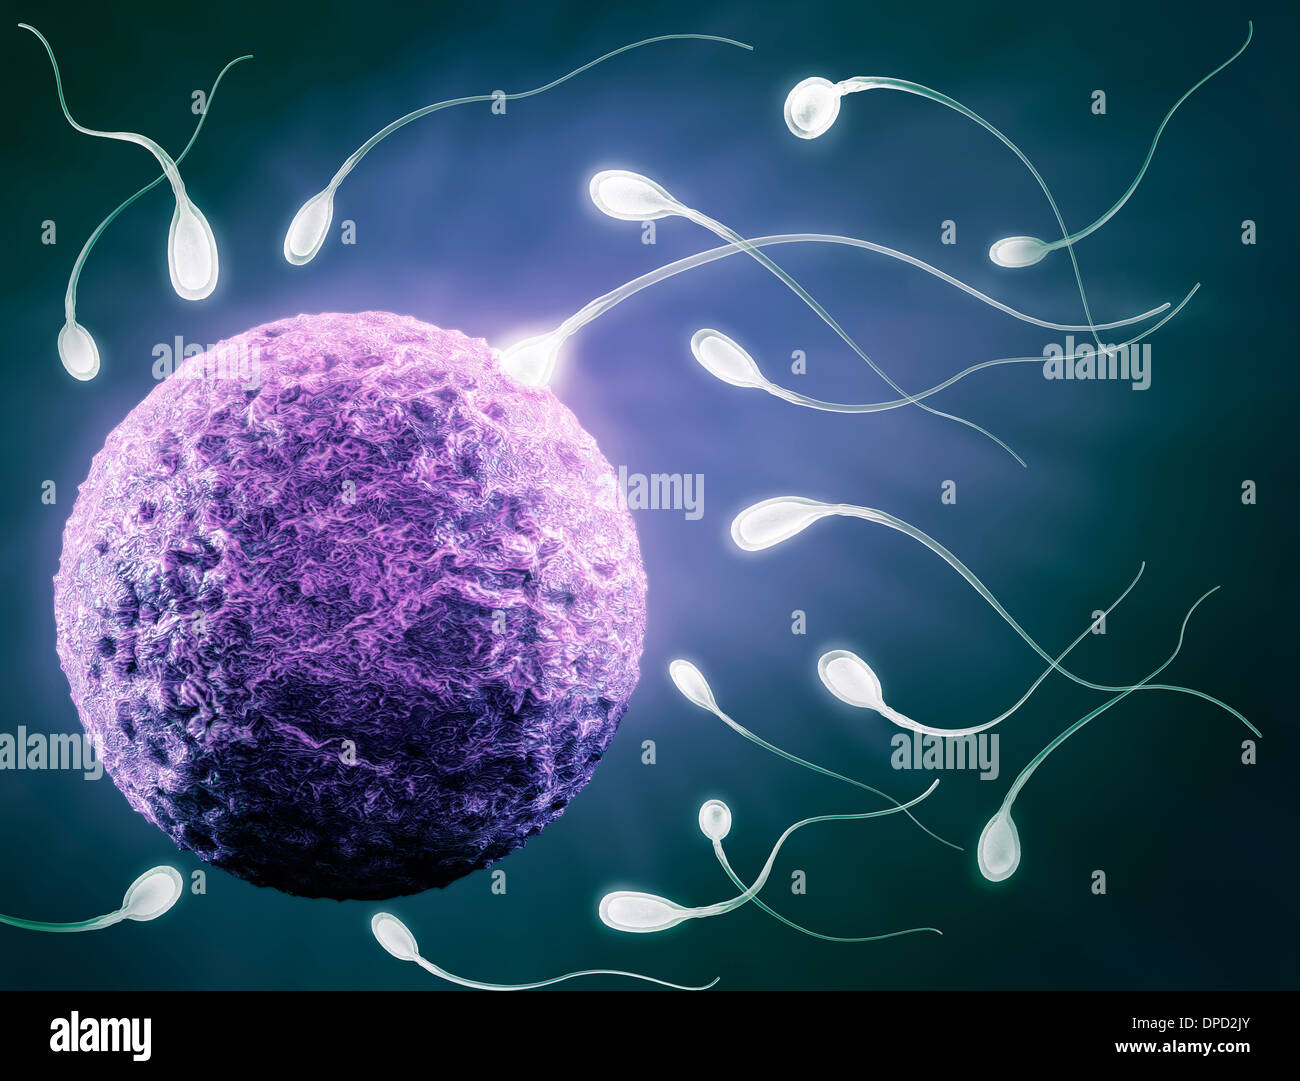 License and prints at MaximImages.com - Fertilization concept. Sperm reaching human egg, artistic 3D illustration in blue colors. Stock Photo